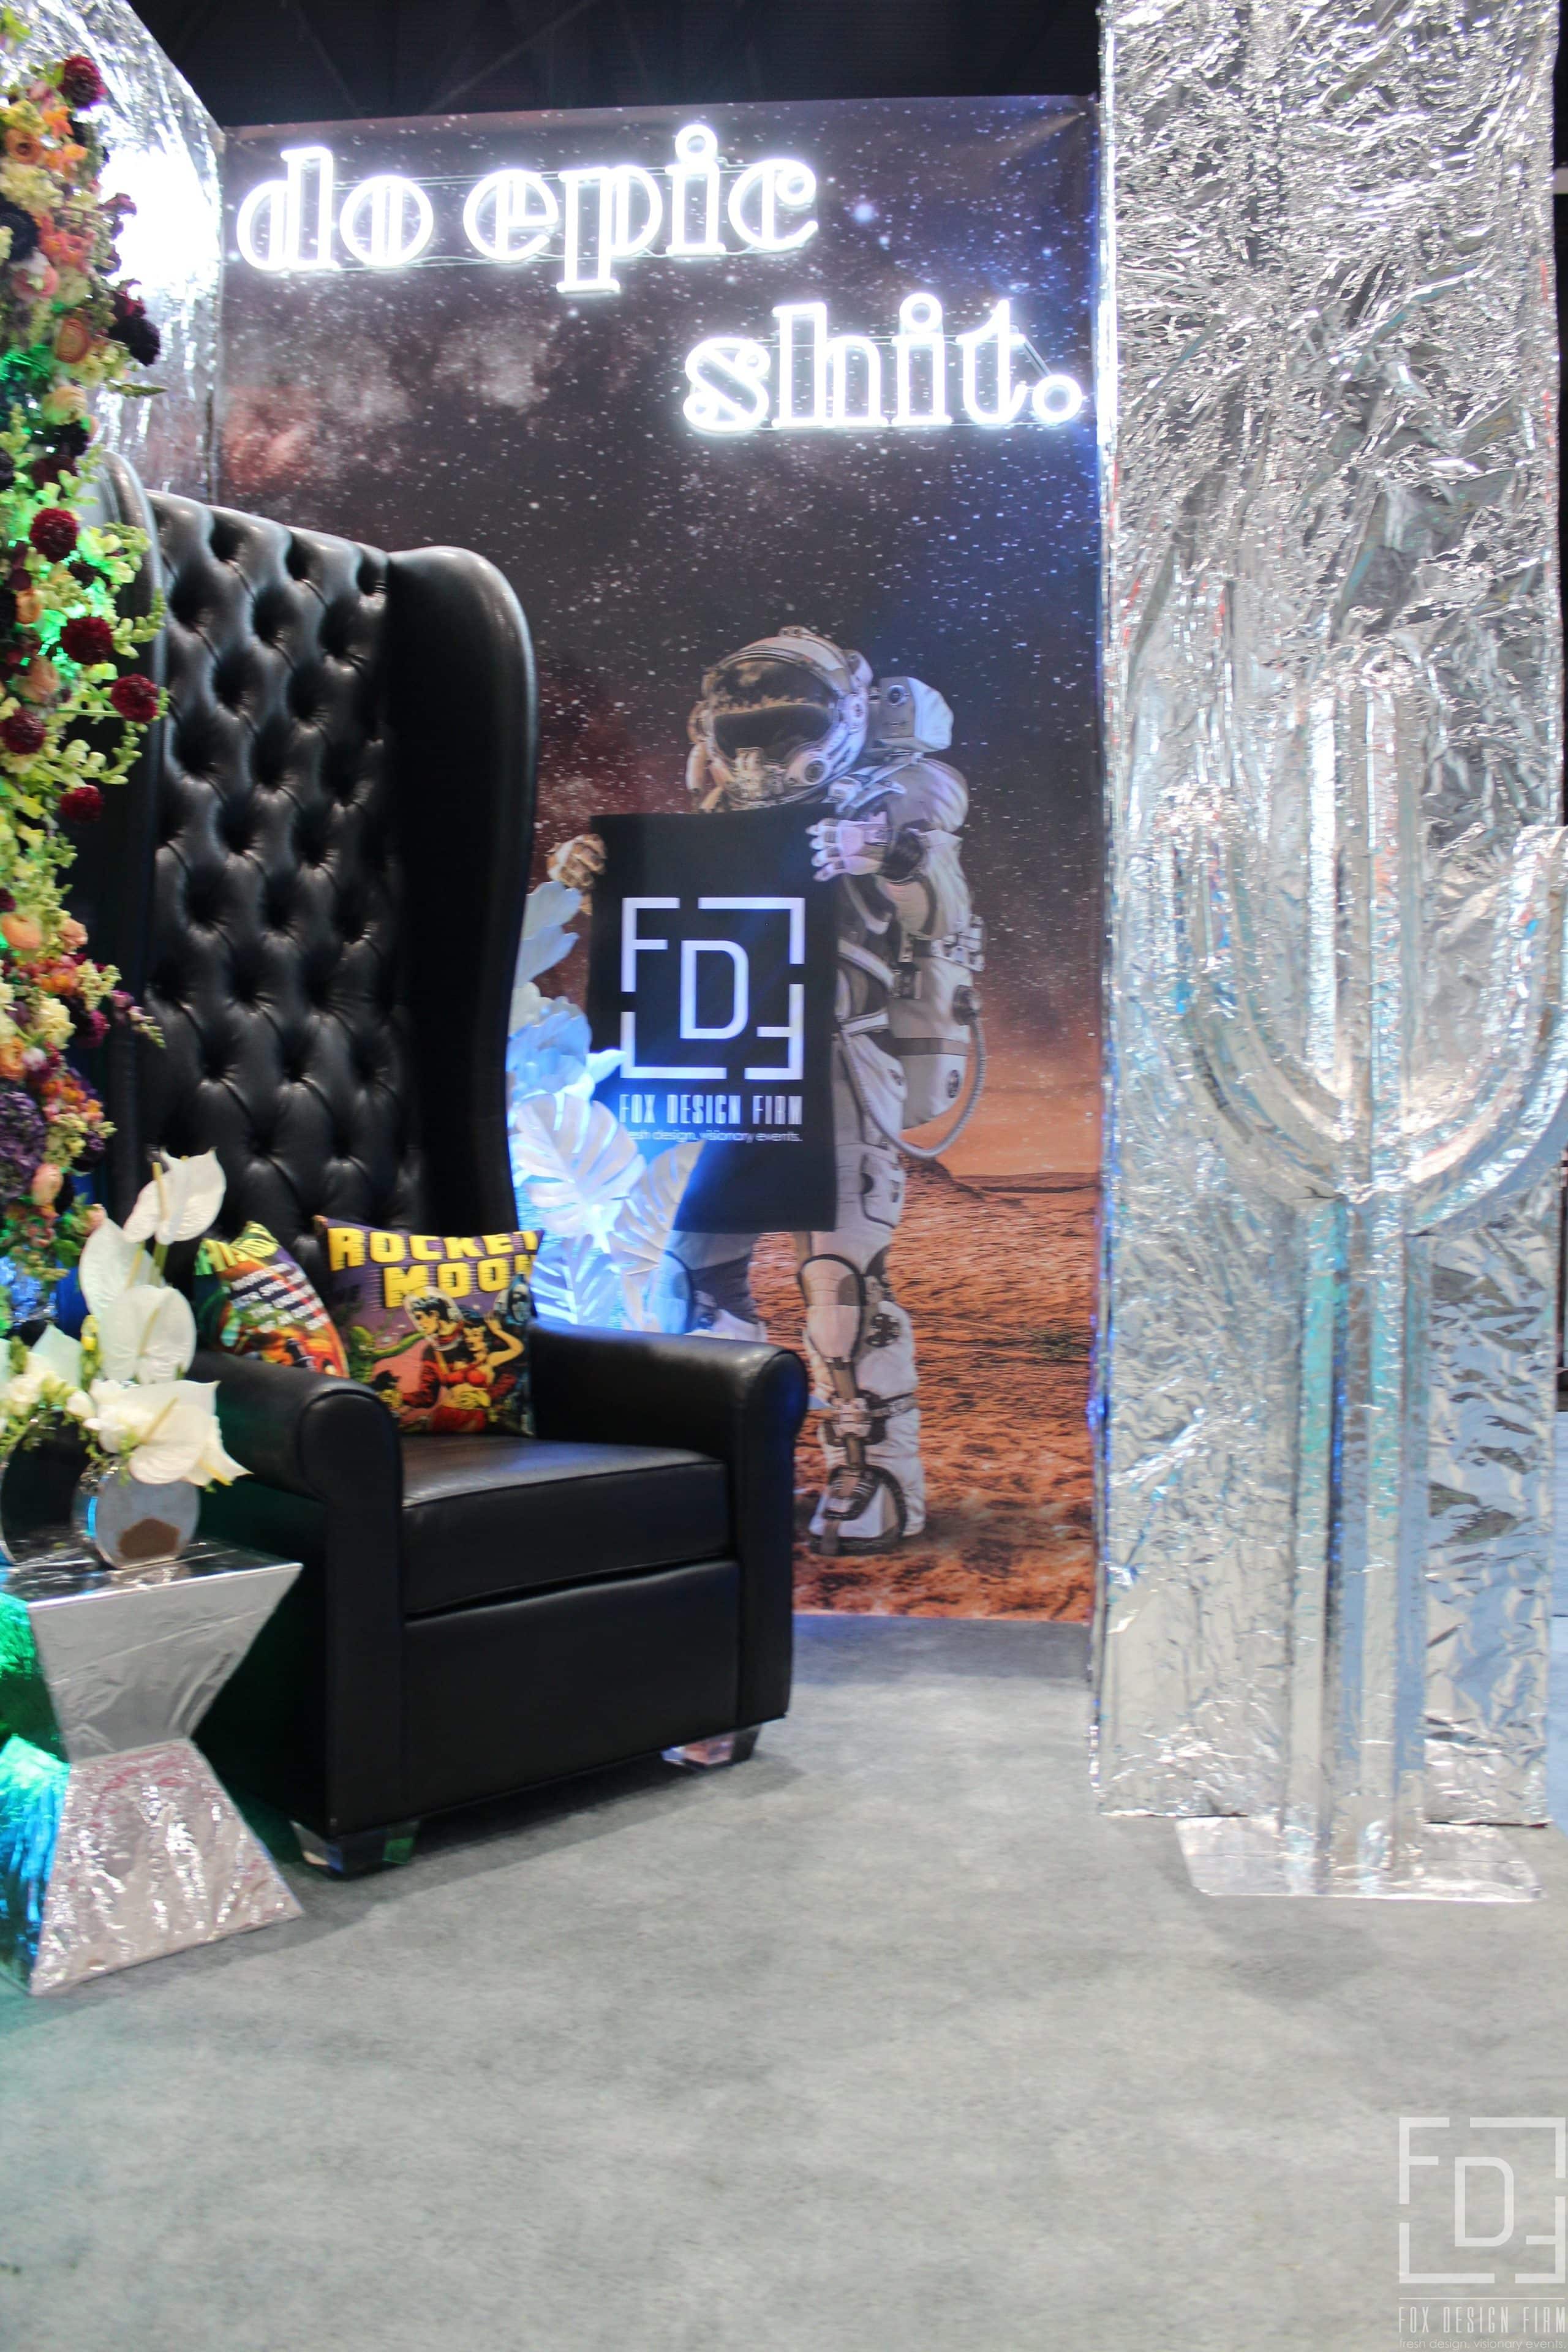 The Special Event Outer Space Booth